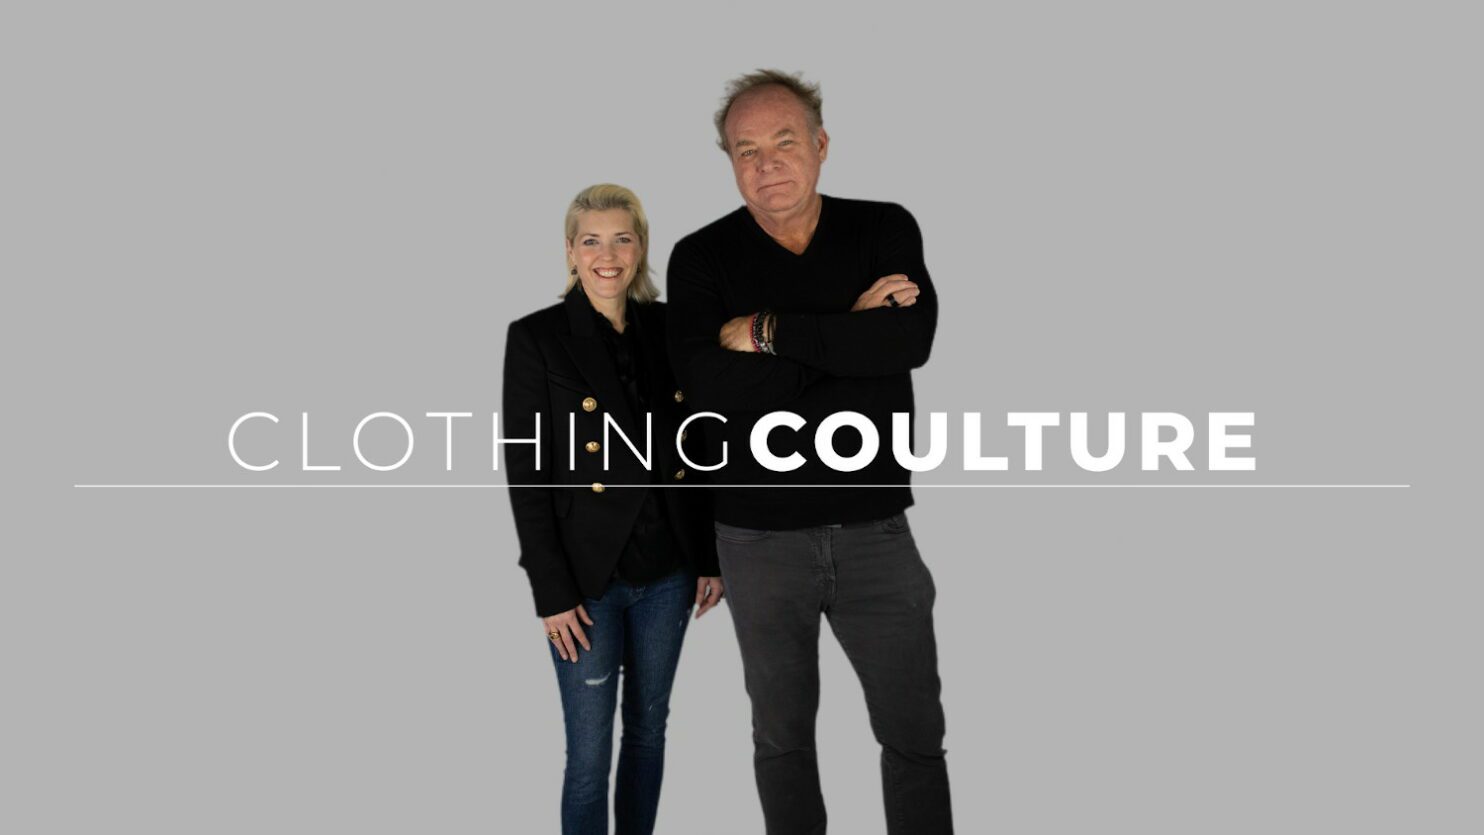 Clothing Coulture Podcast hosts Bret Schnitkerand Emily Lane